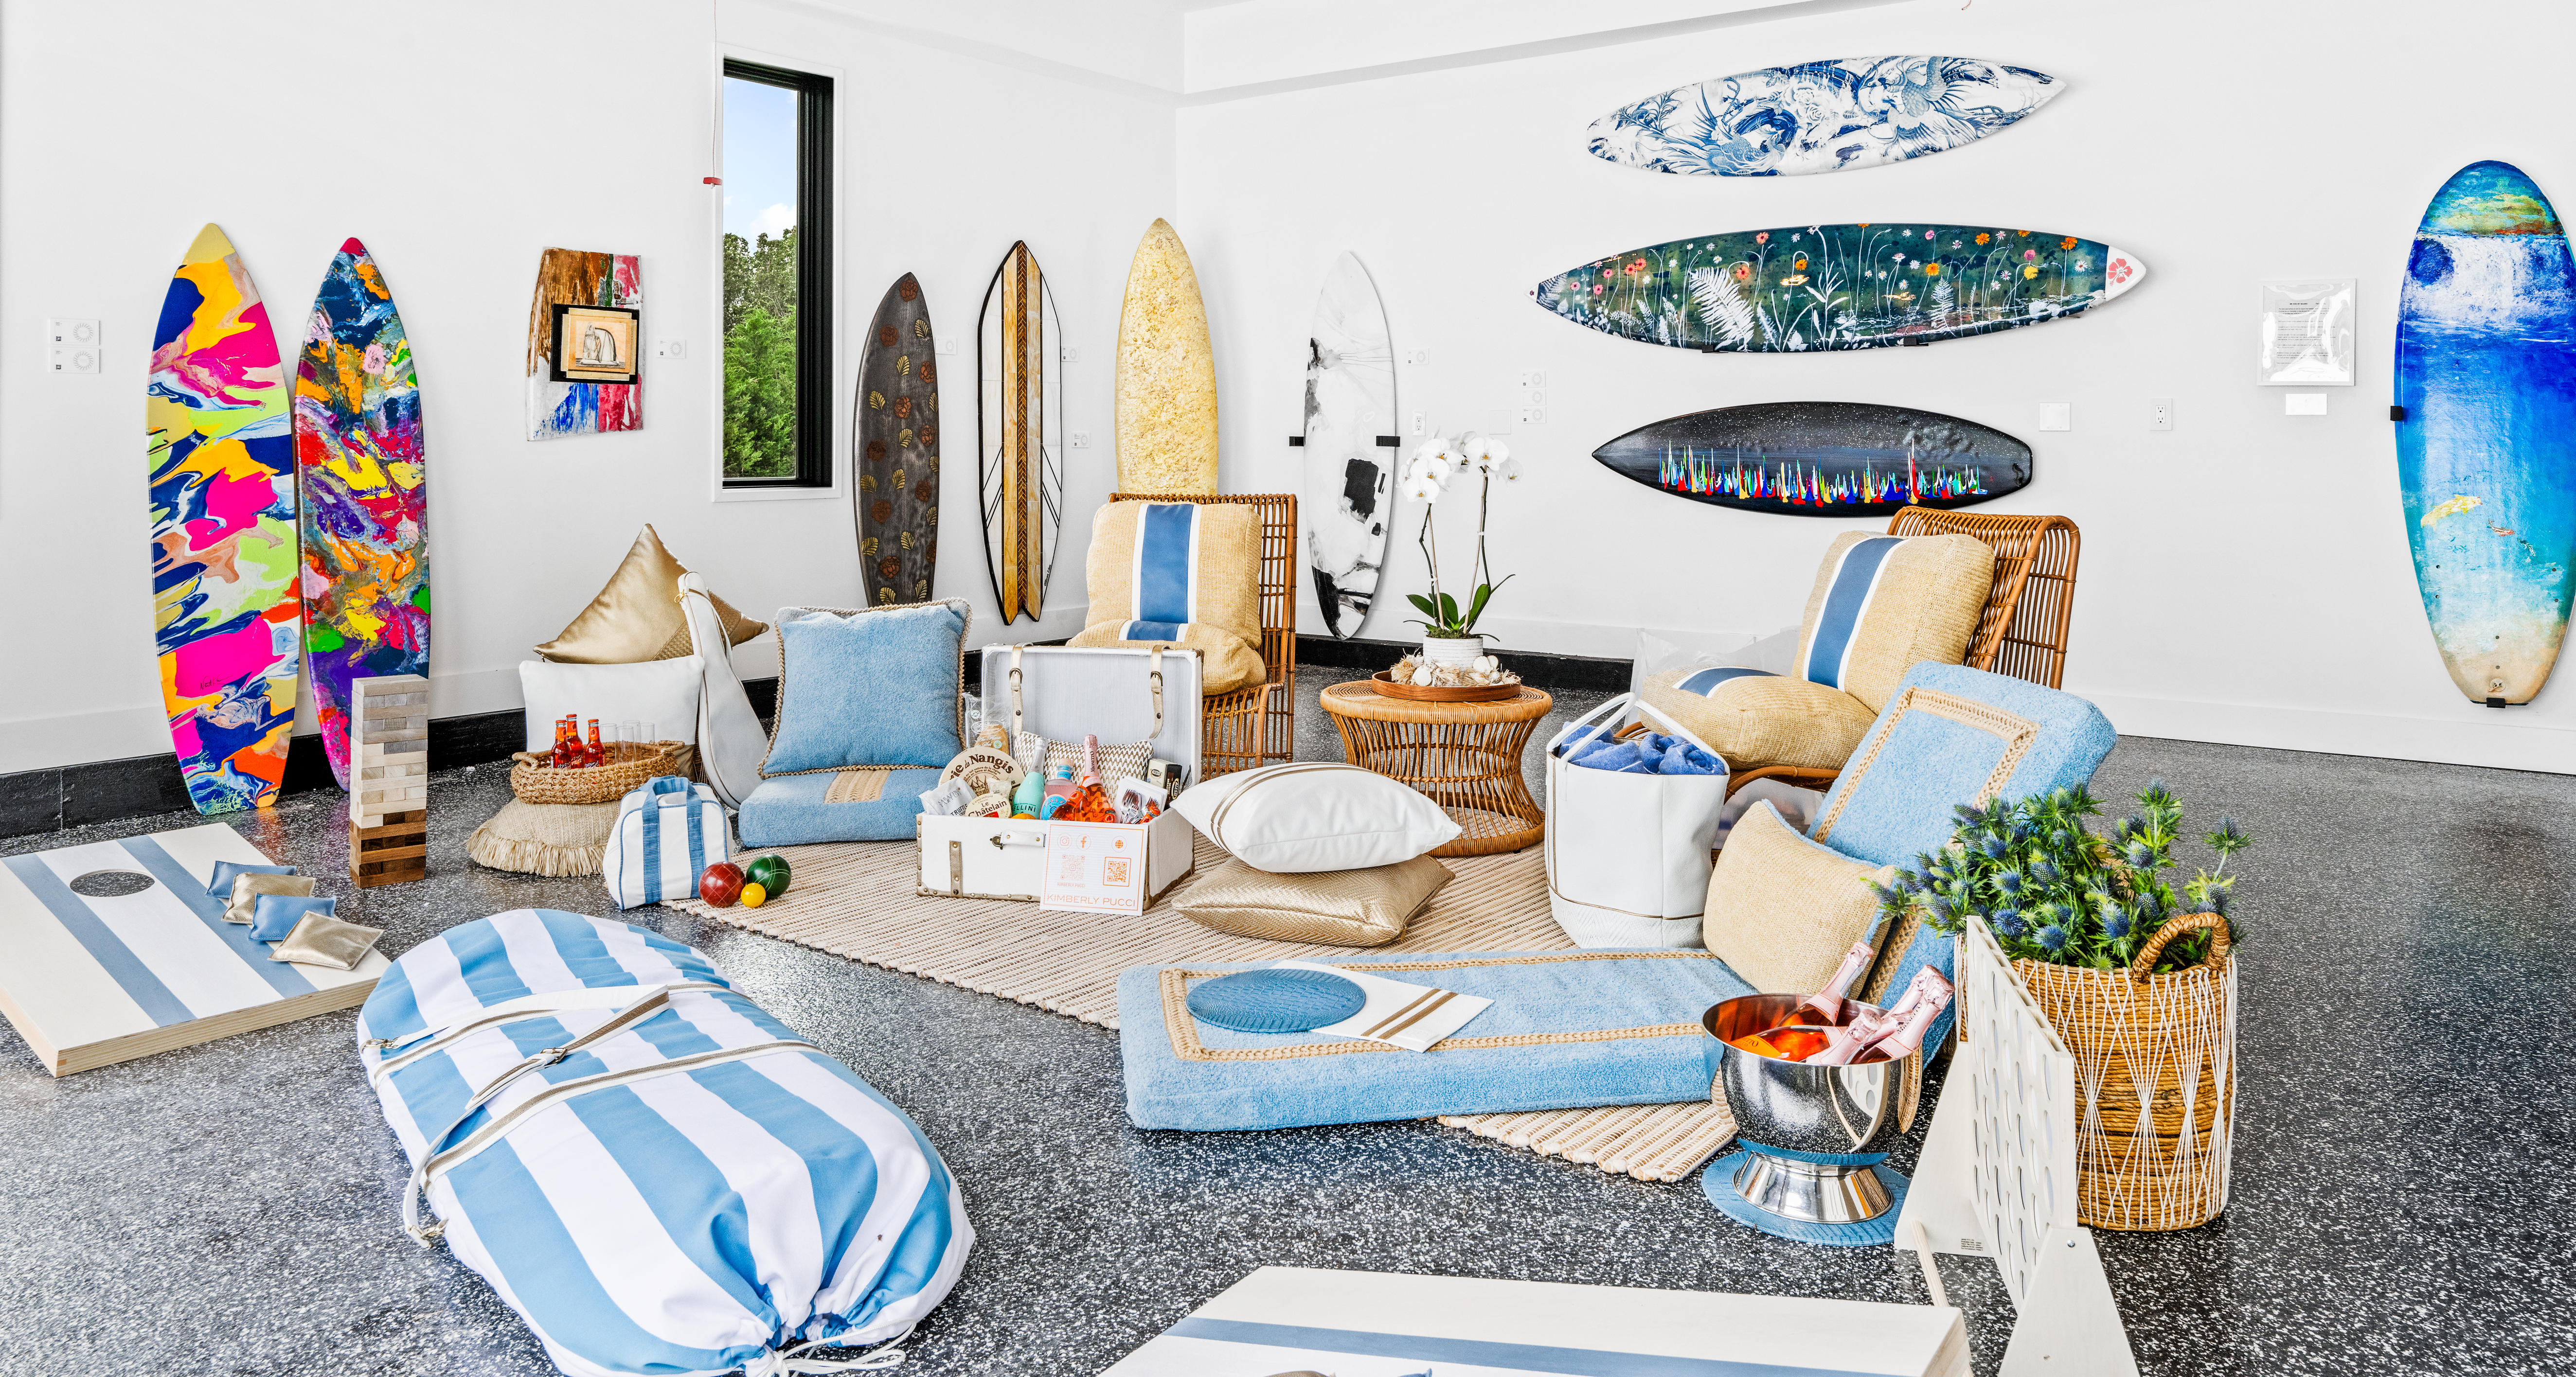 Art surfboards on display at the Hamptons Holiday House